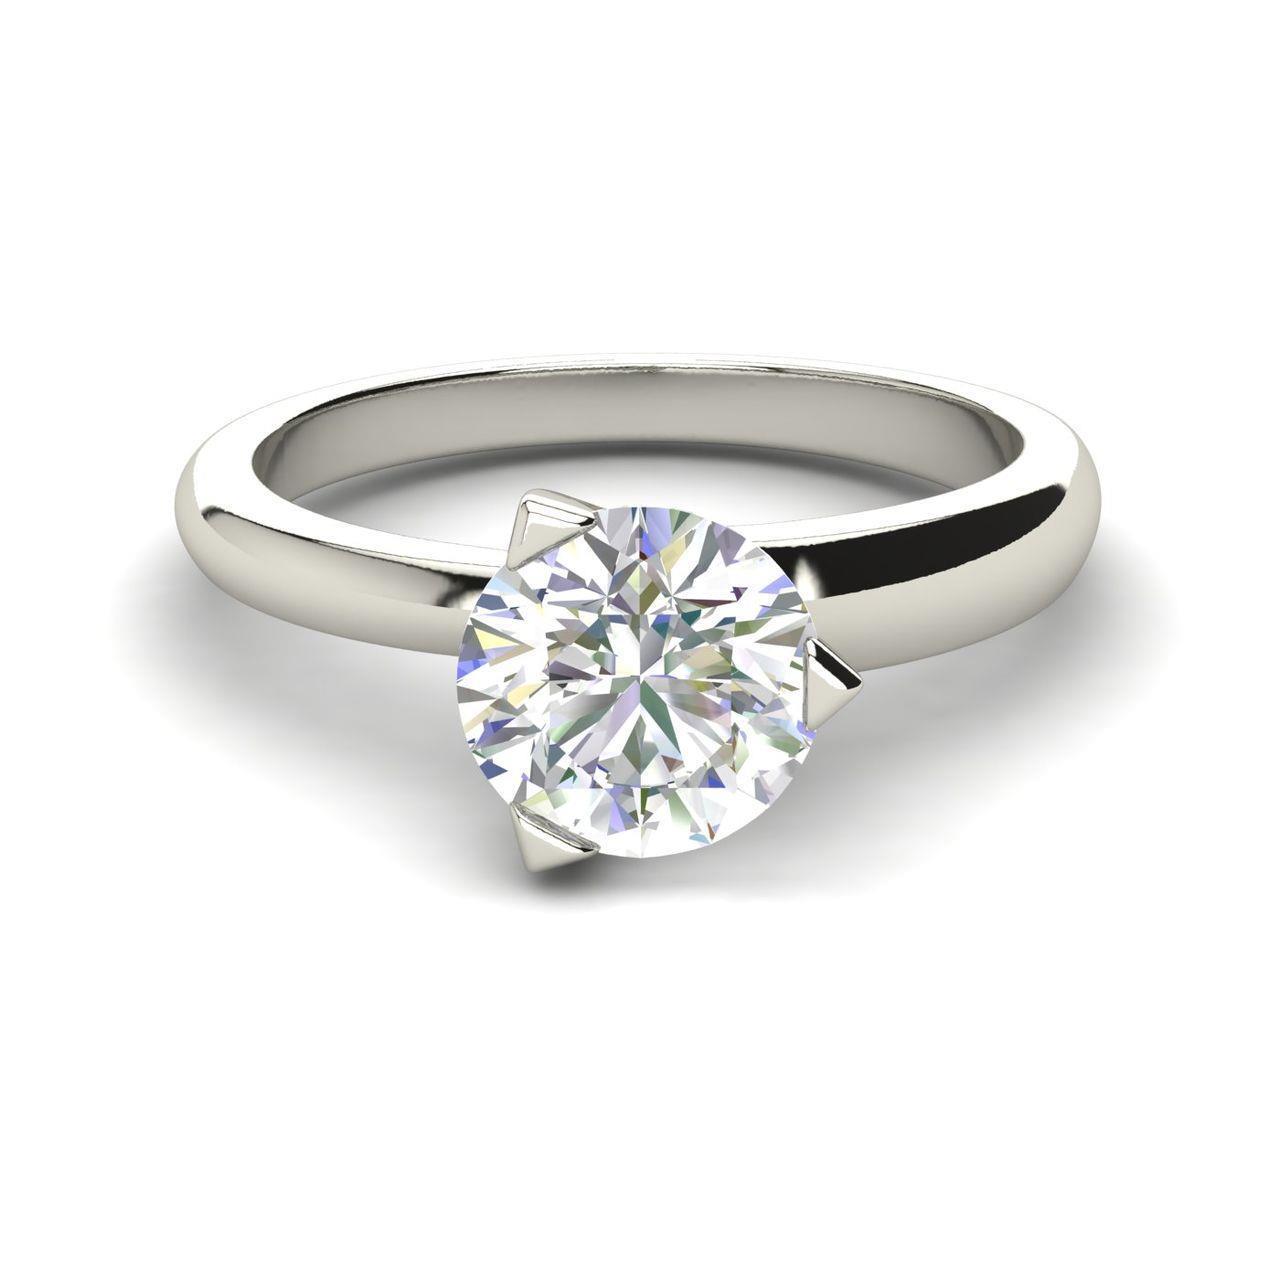 simple 0.5 carat solitaire engagement rings yellow gold